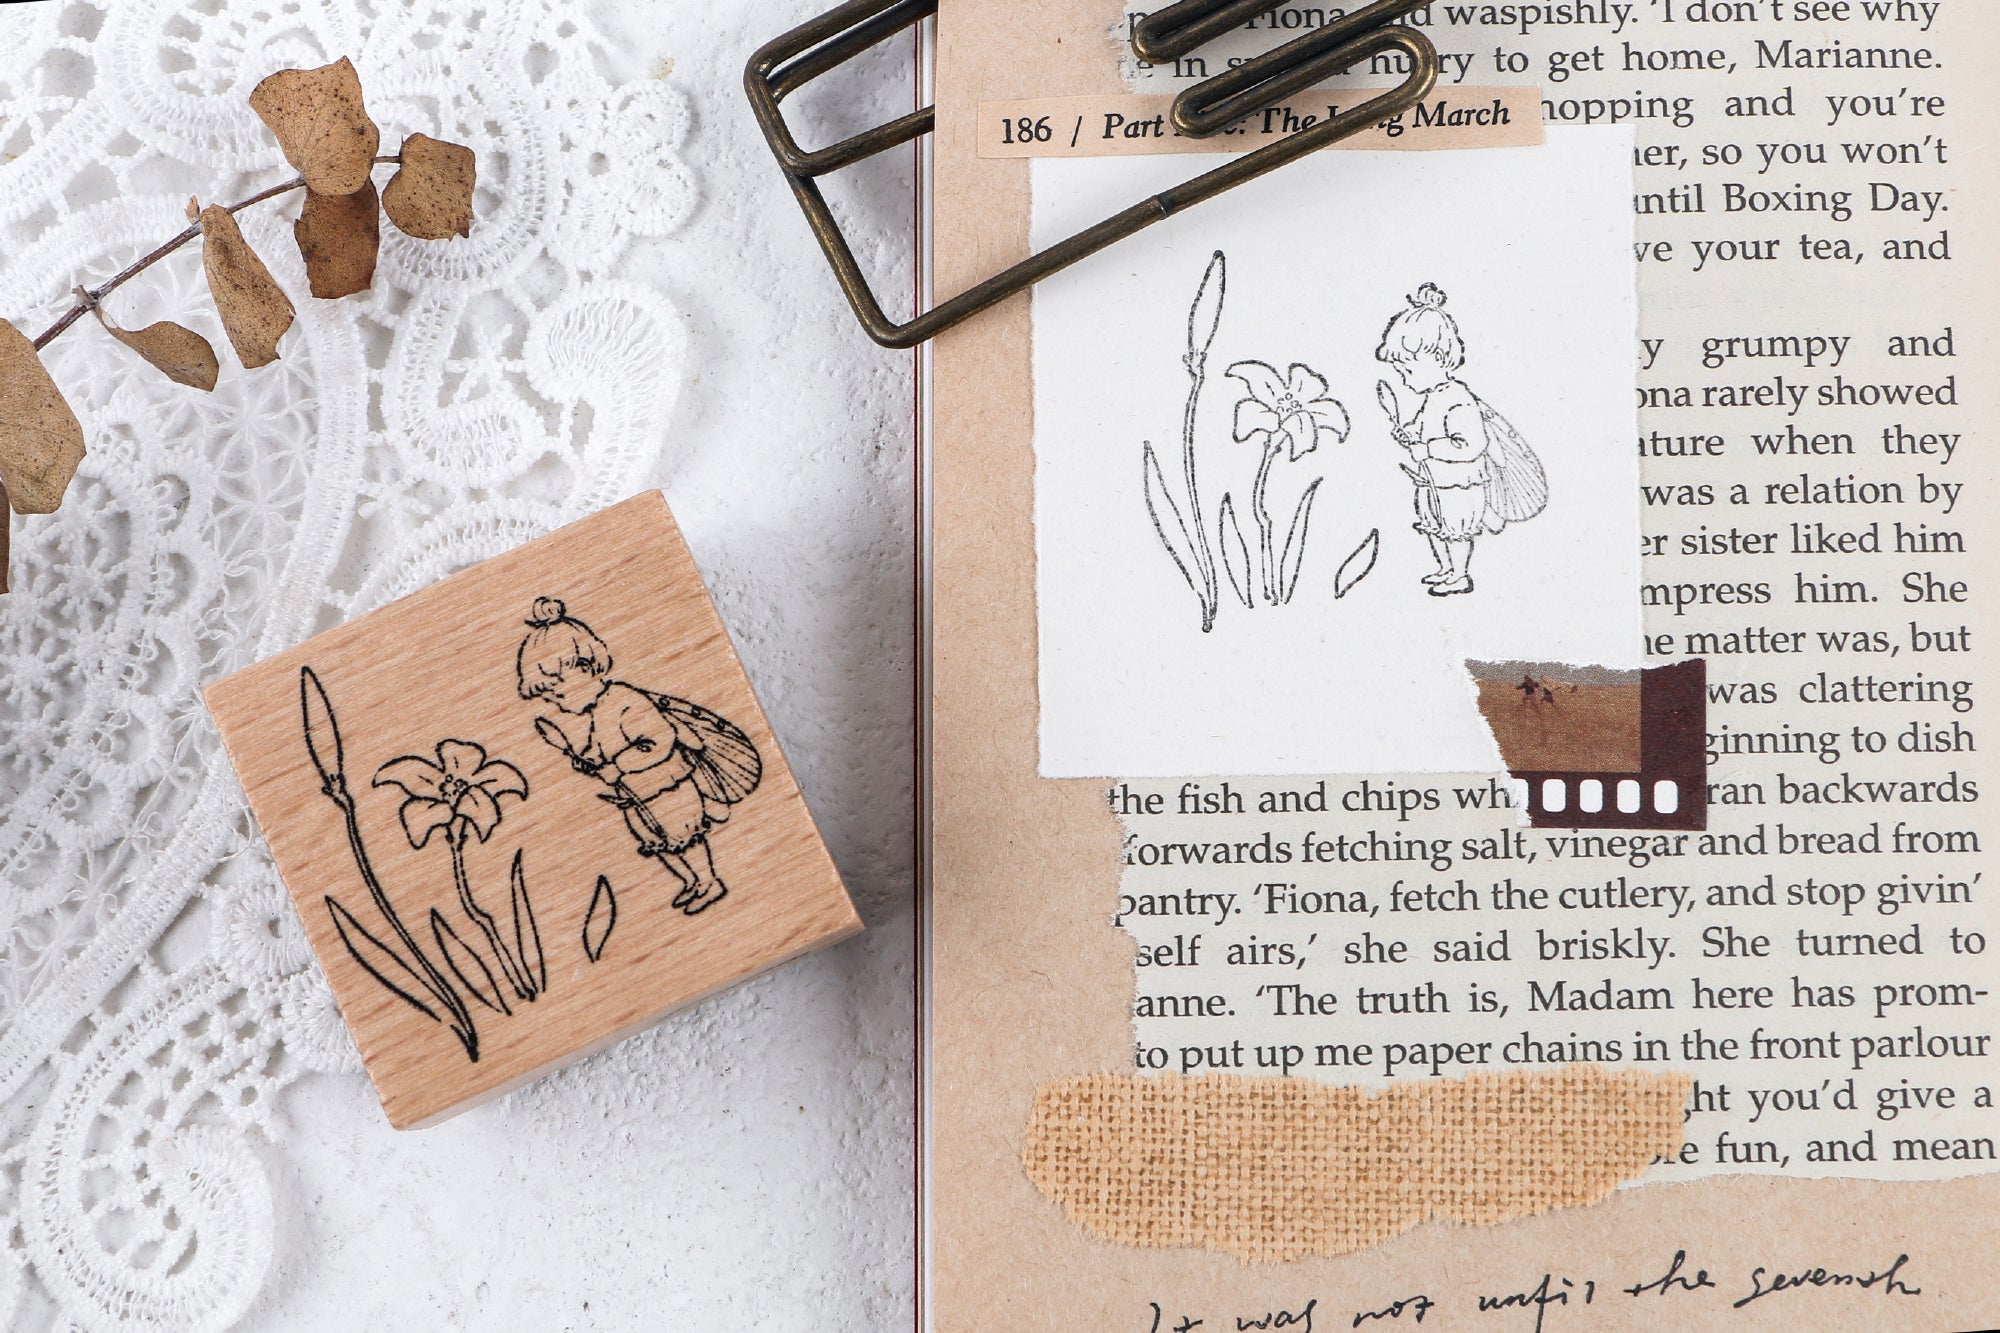 Forest Tales Series Wooden Stamps